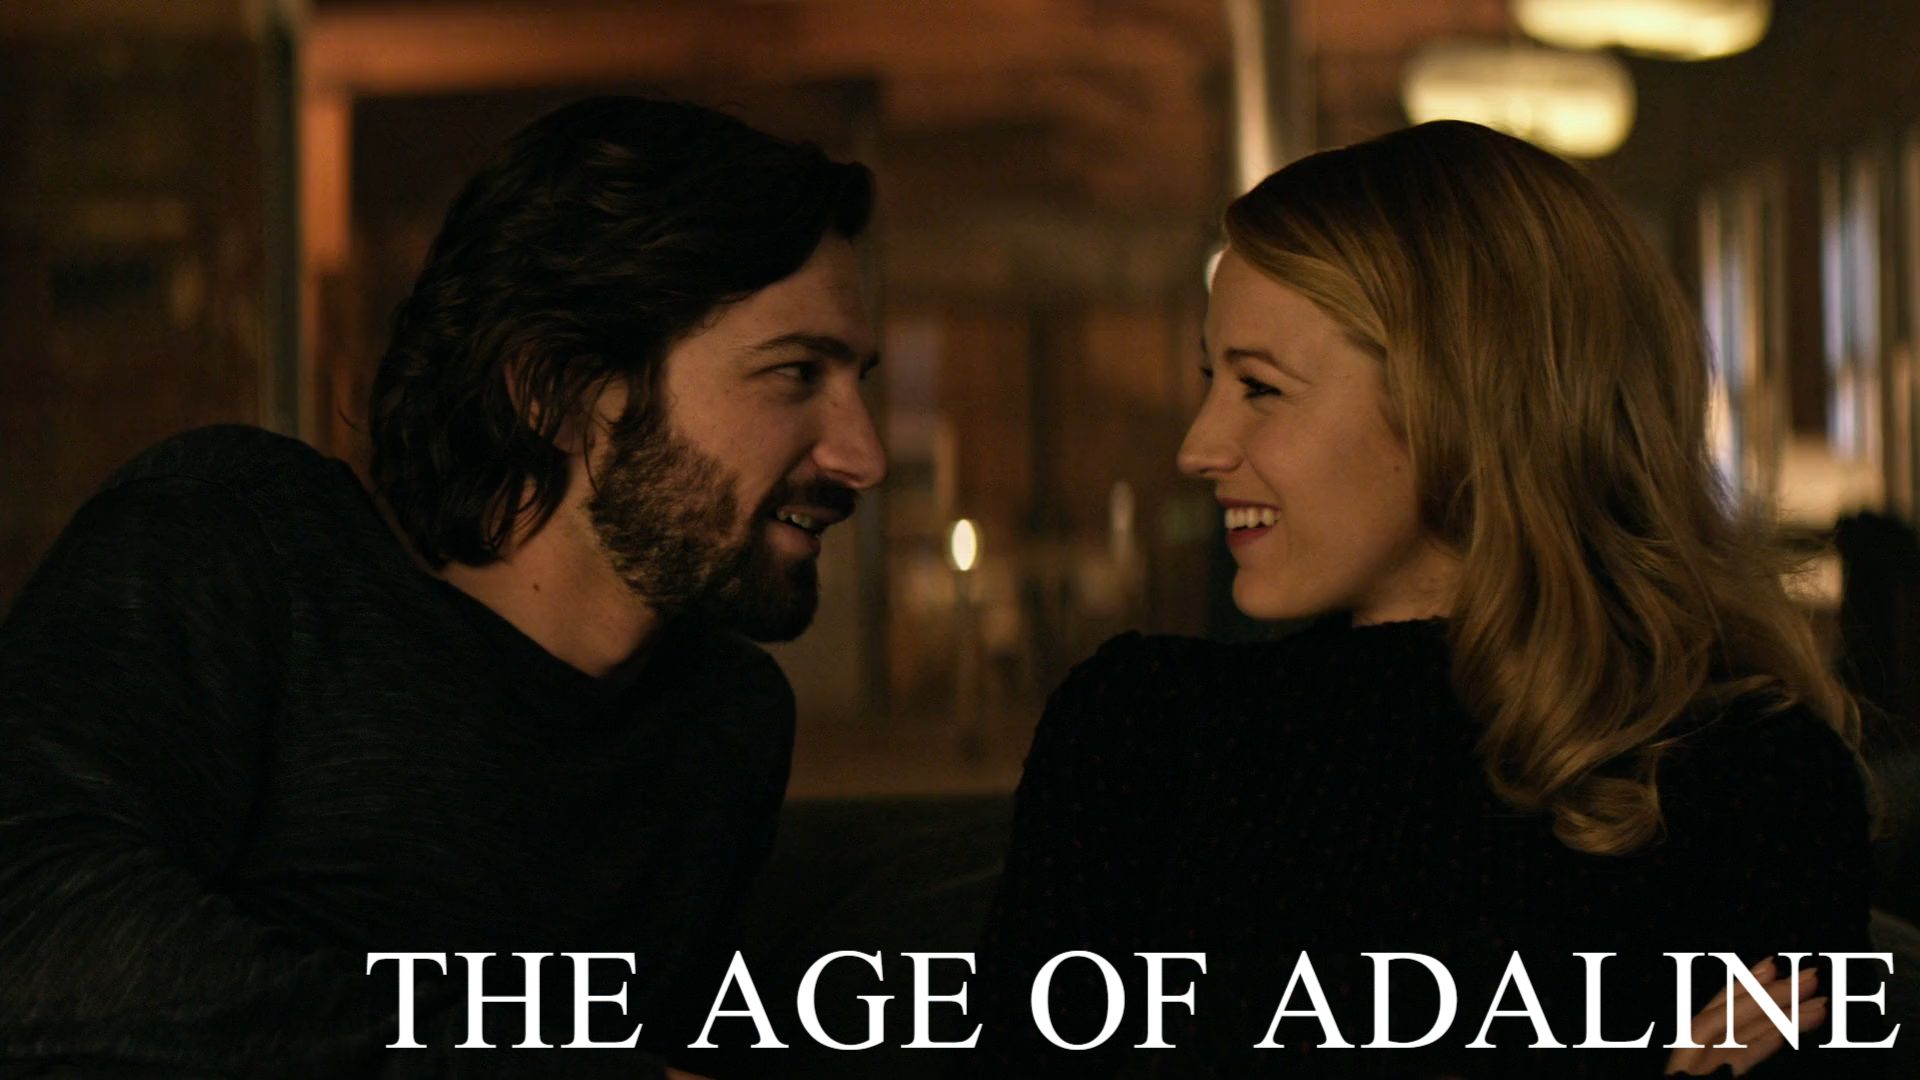 The Age of Adaline (2015) [Rated G] - Bilibili